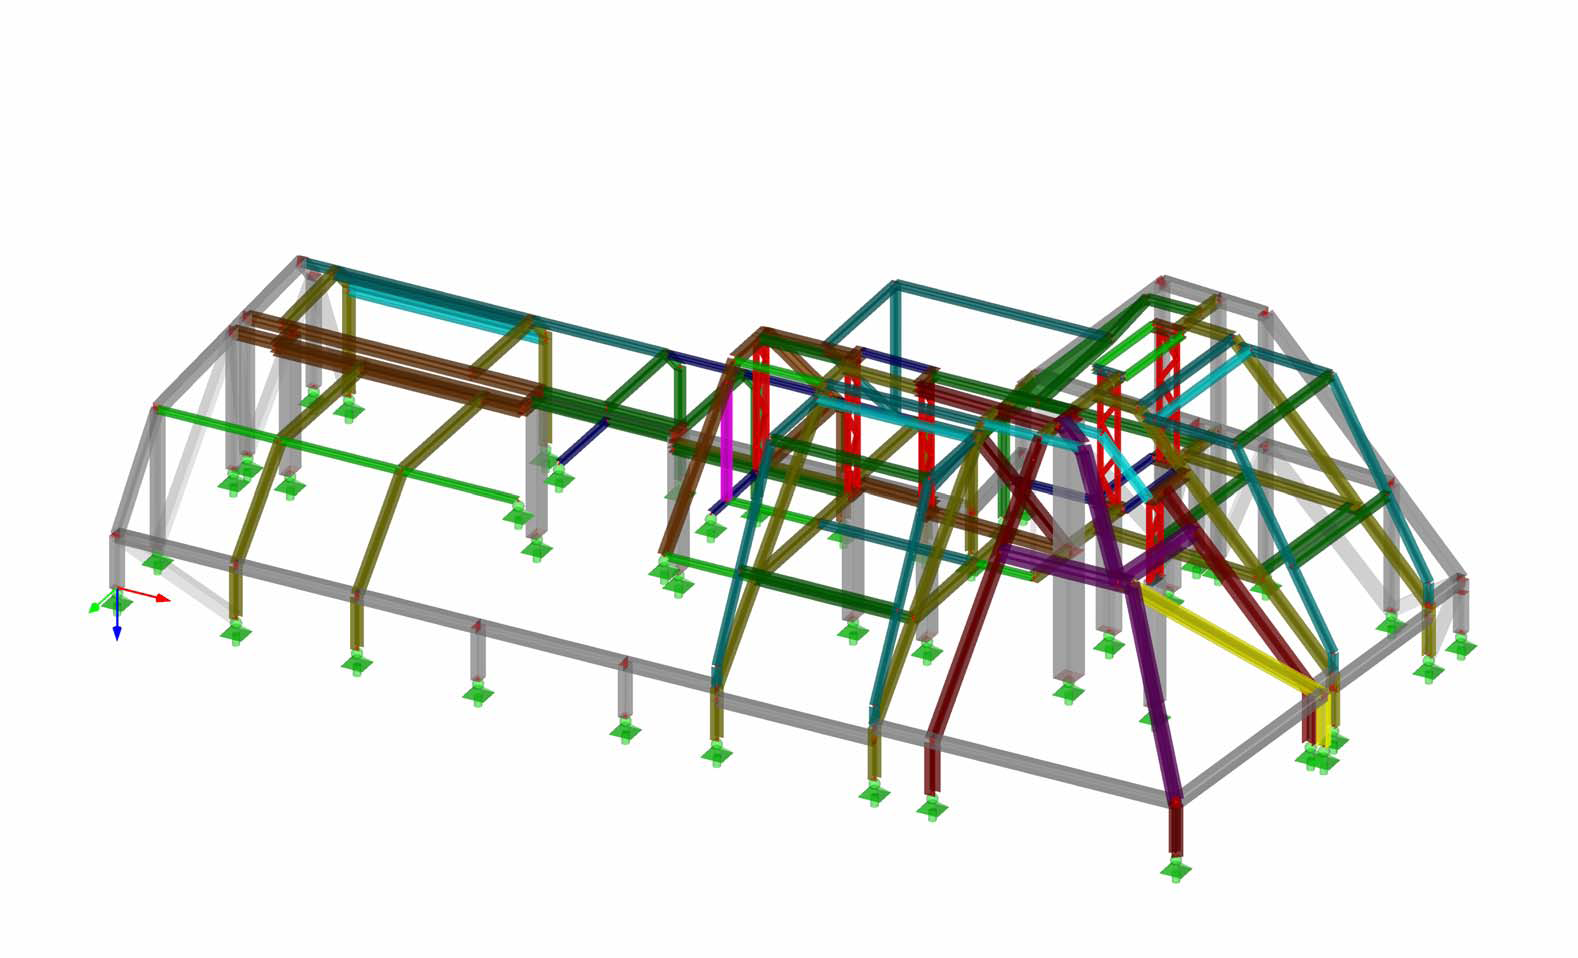 Original Structure - Every Color represents a different type of steel profile